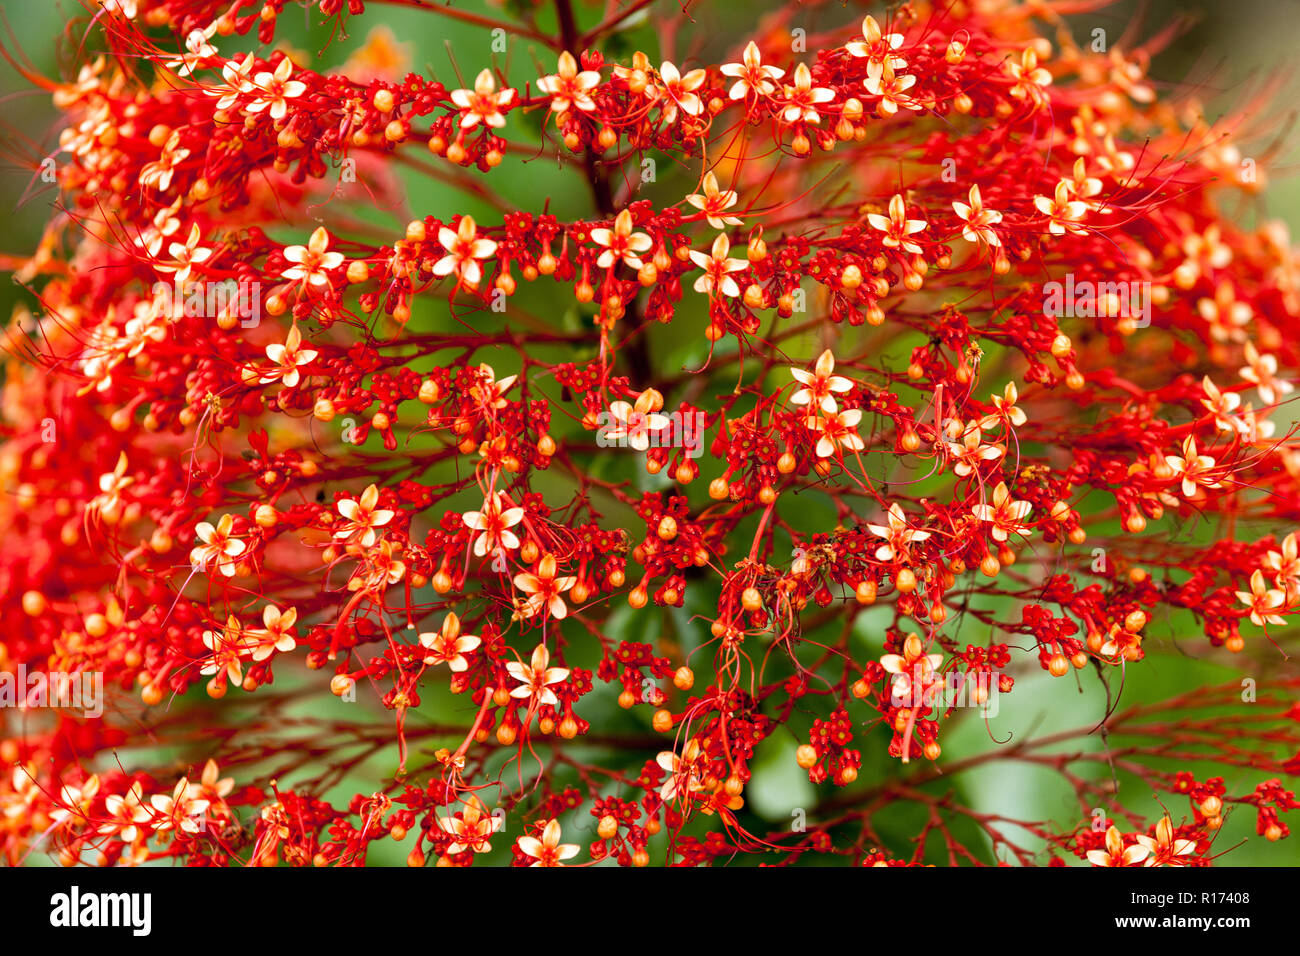 Red pagoda, Clerodendrum Paniculatum is a beautiful medical herbal flower in China Stock Photo